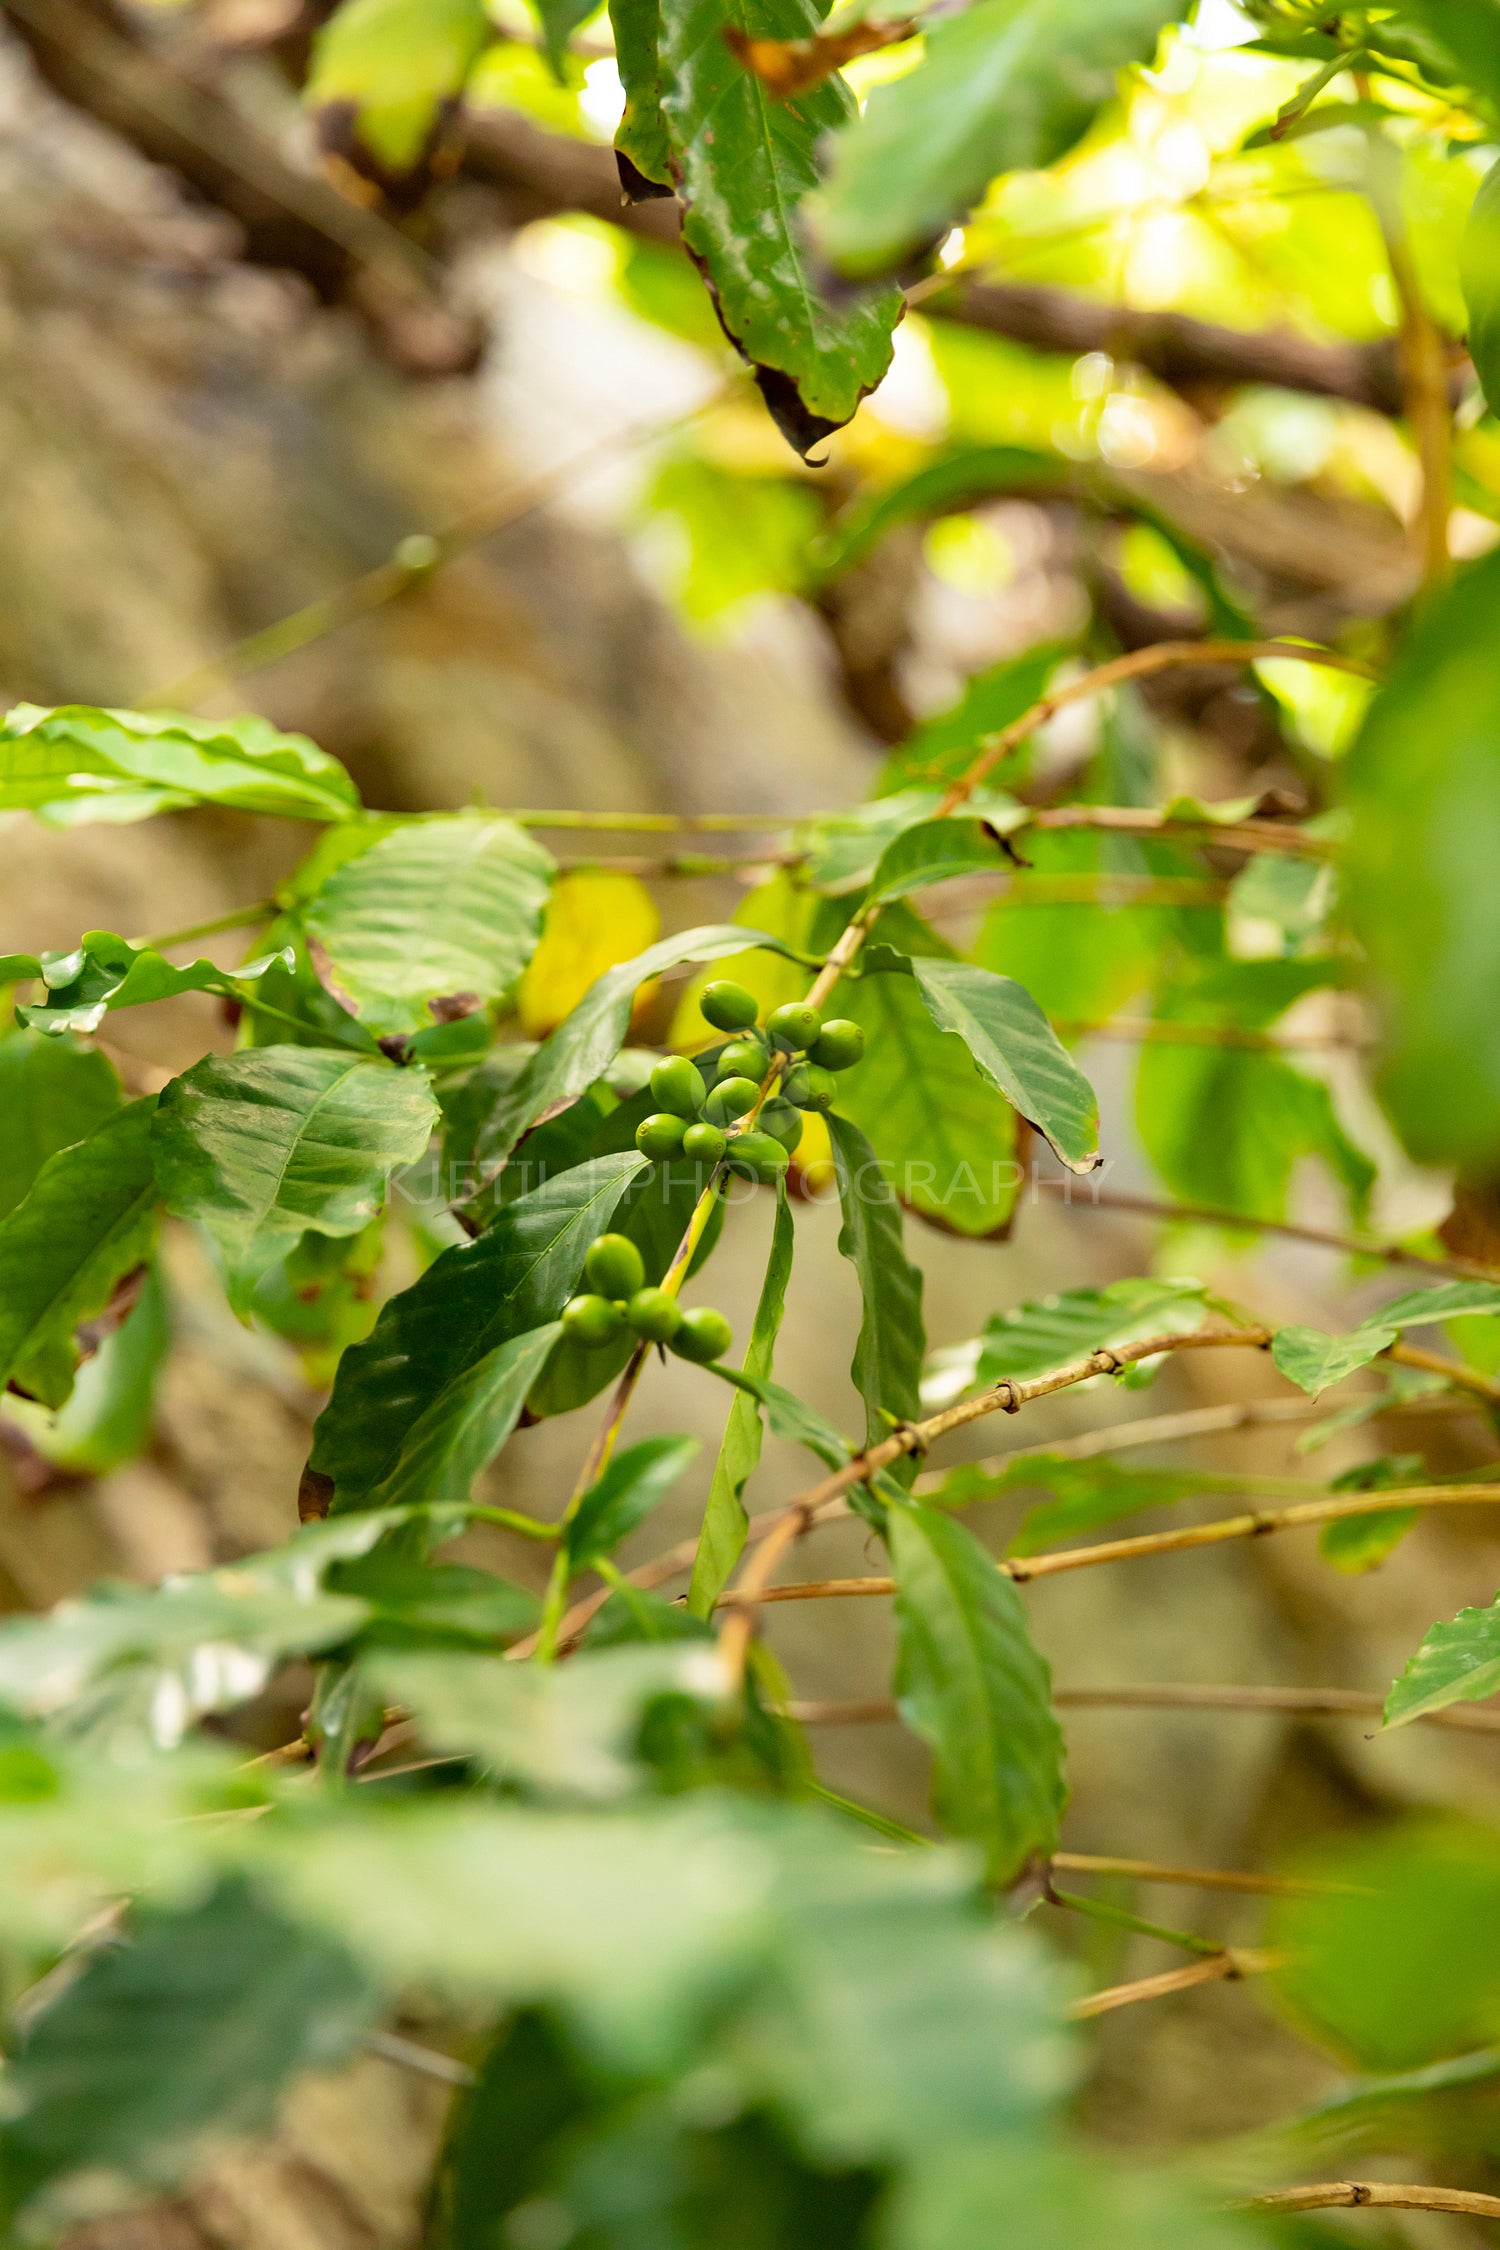 Green Coffee Fruit Plant Growing at Farm